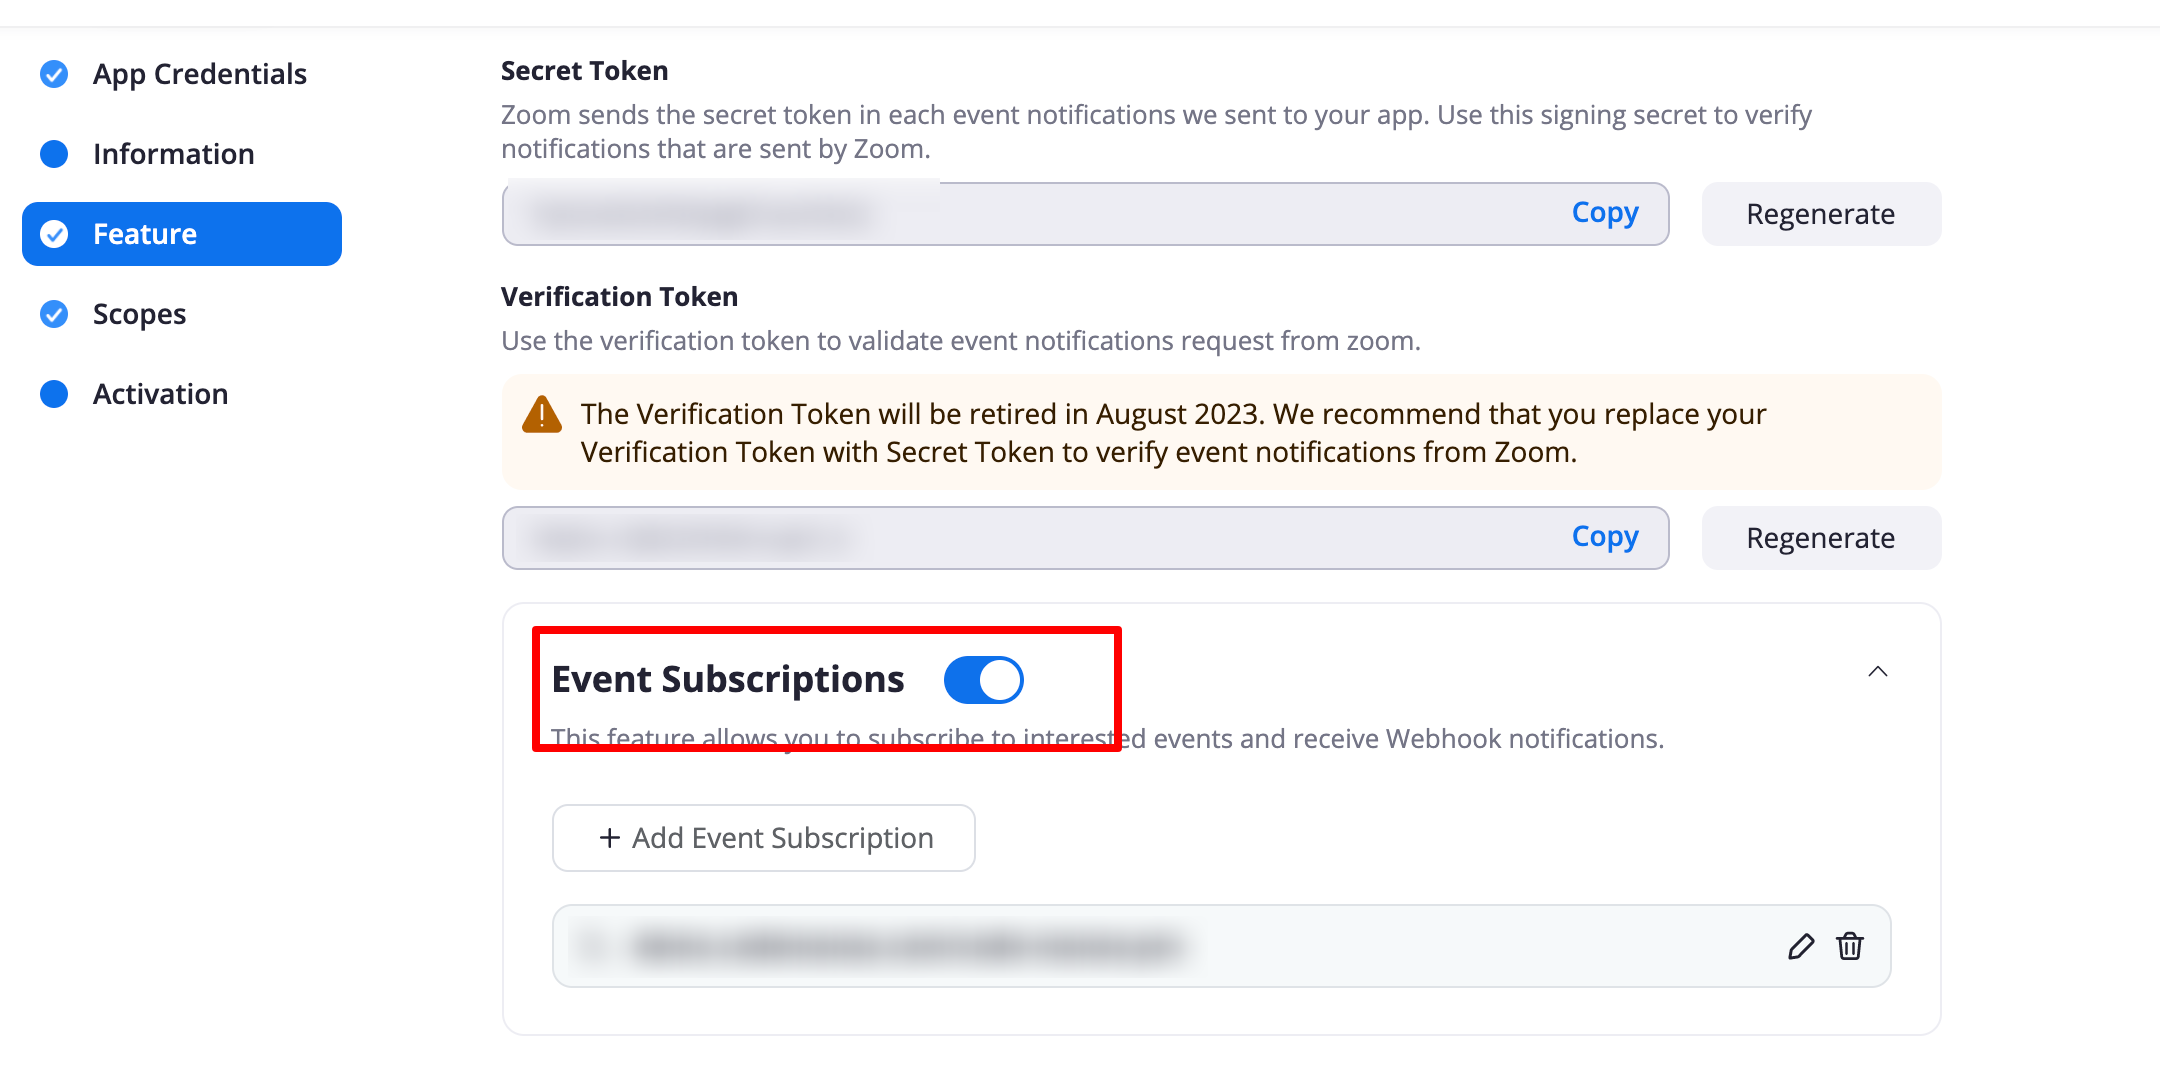 Event Subscriptions